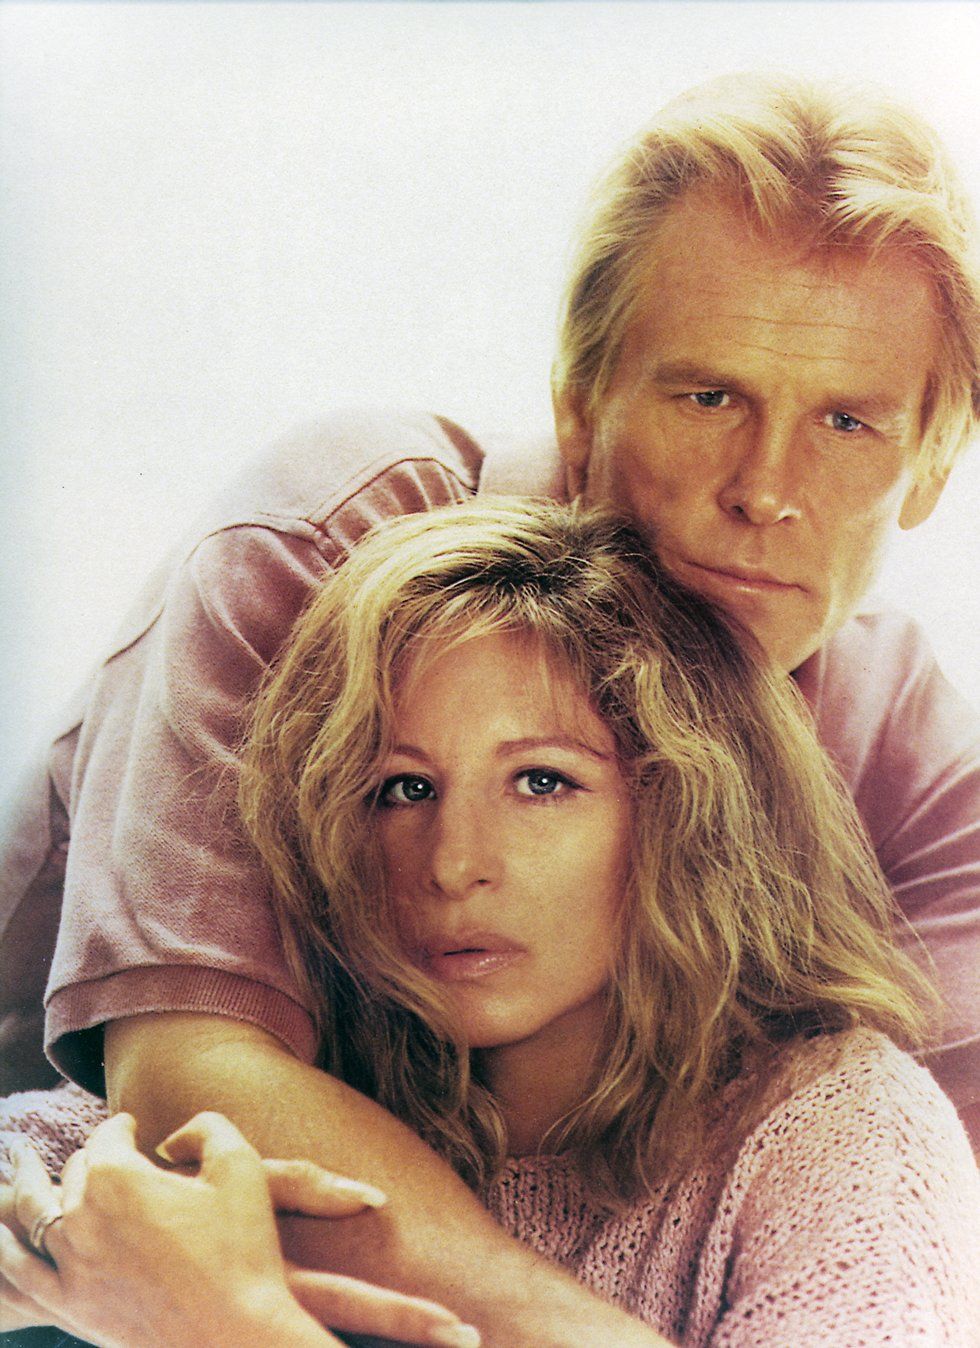 Nolte and Streisand in a dramatic photo by Scavullo.